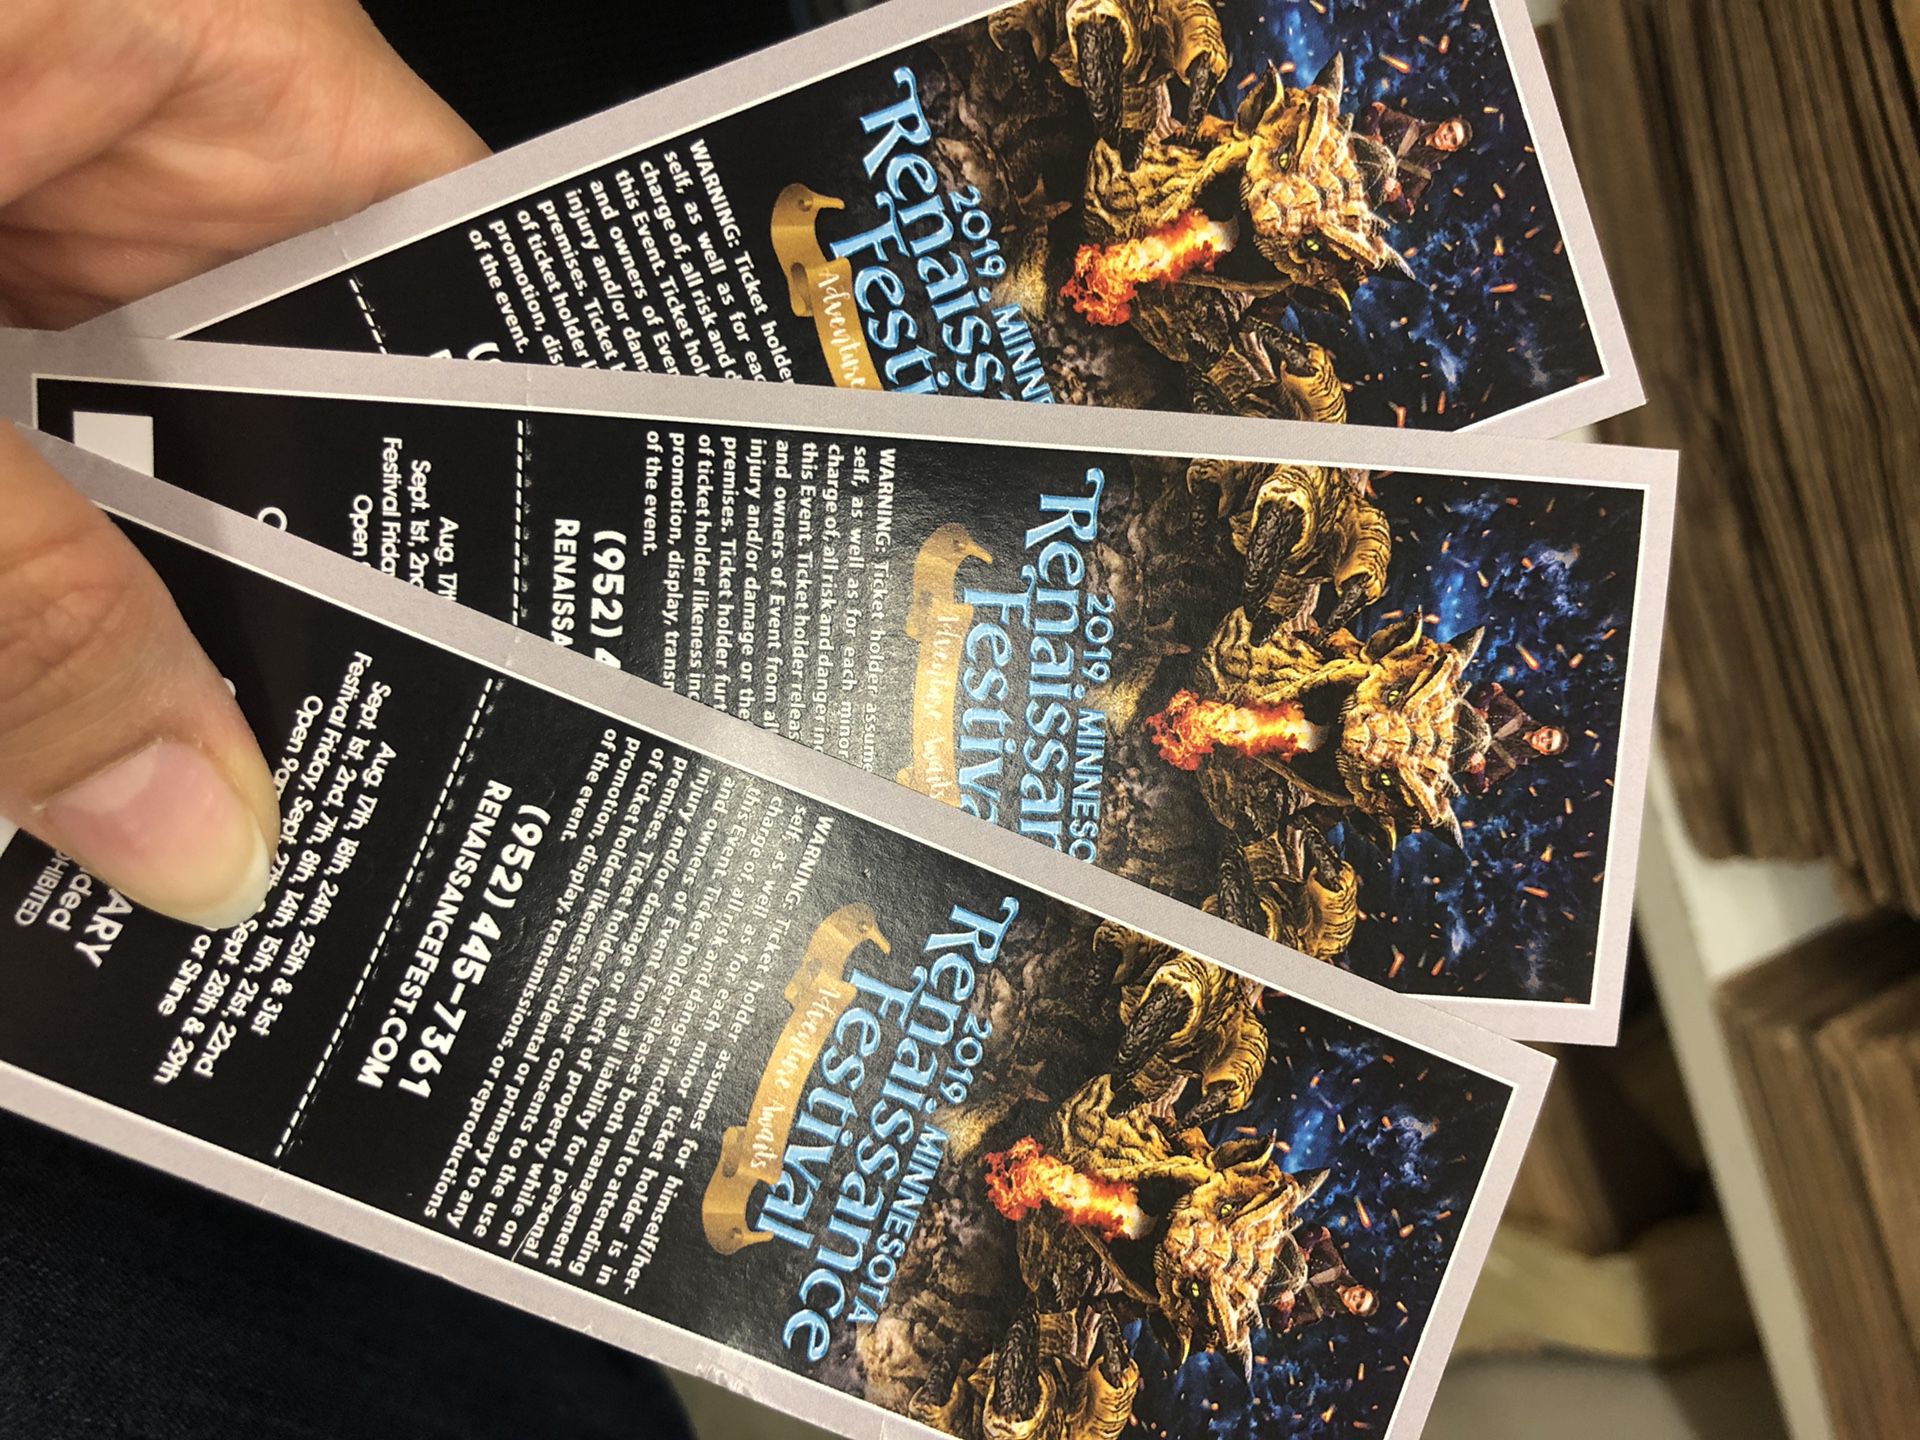 Renaissance tickets. Two for $30